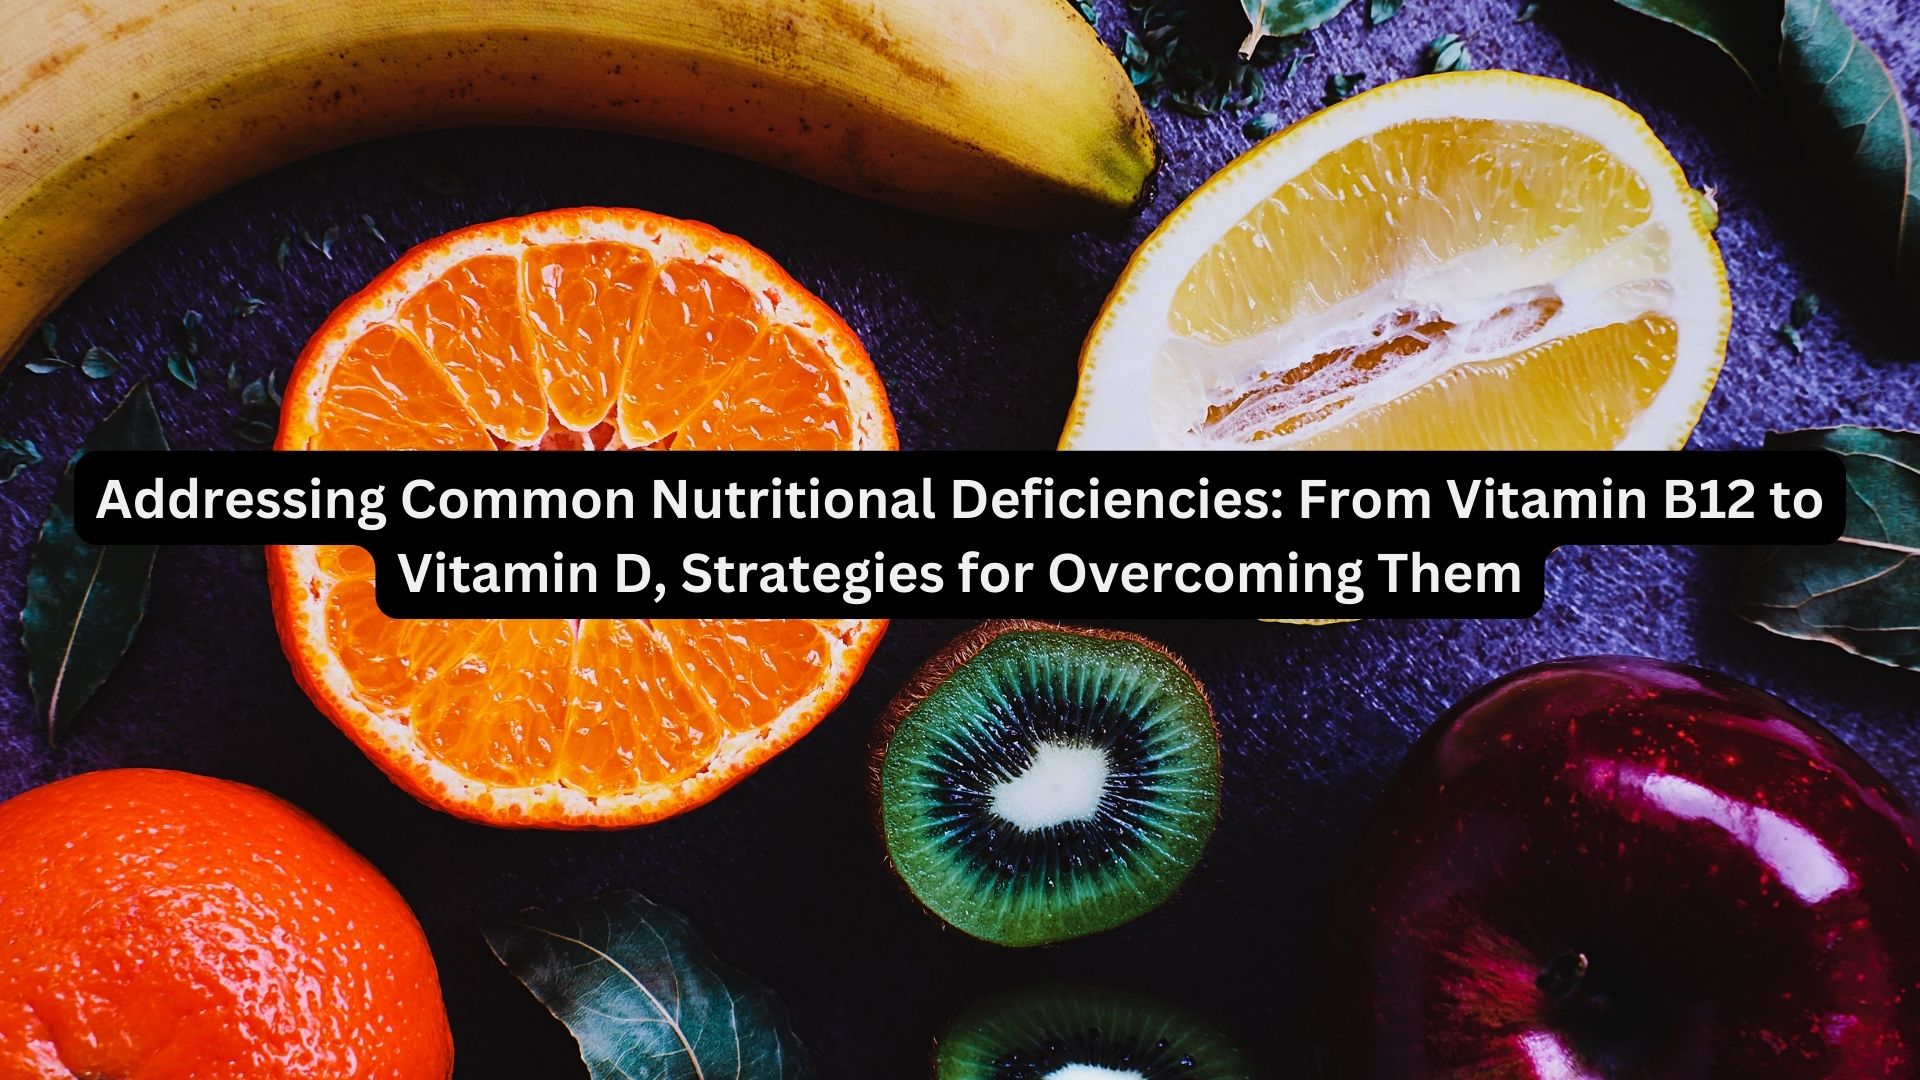 Addressing Common Nutritional Deficiencies: From Vitamin B12 to Vitamin D, Strategies for Overcoming Them